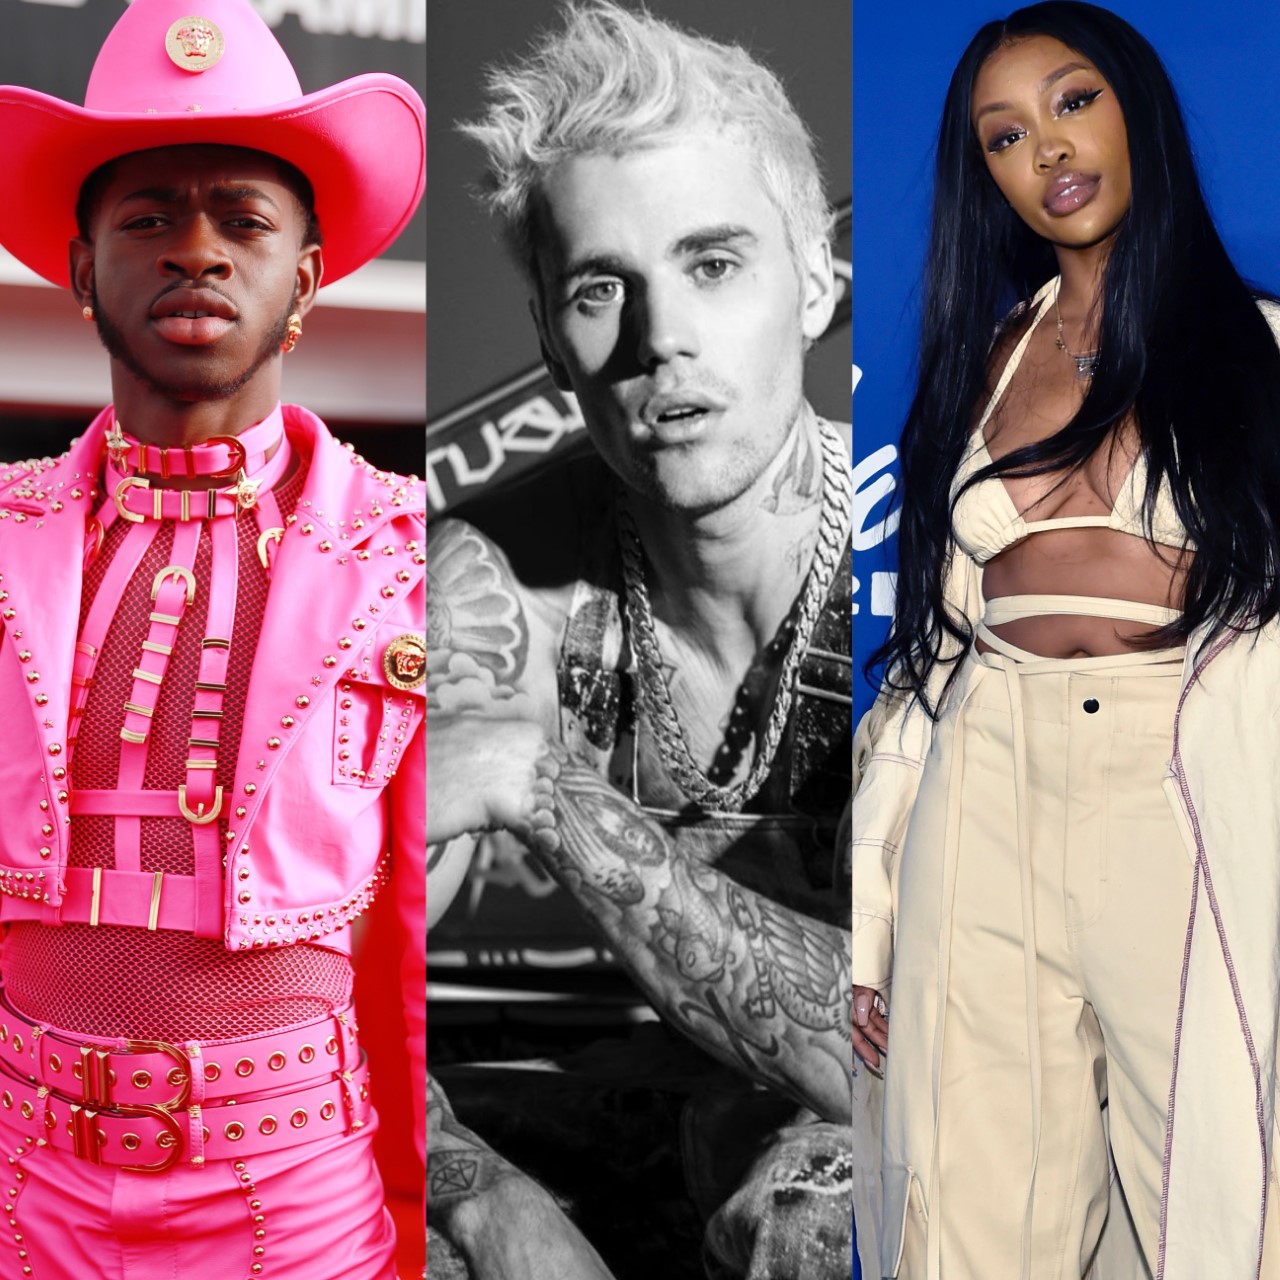 Justin Bieber Sza Lil Nas X And More In Calvin Klein S New Deal With It Campaign 99 7 Now